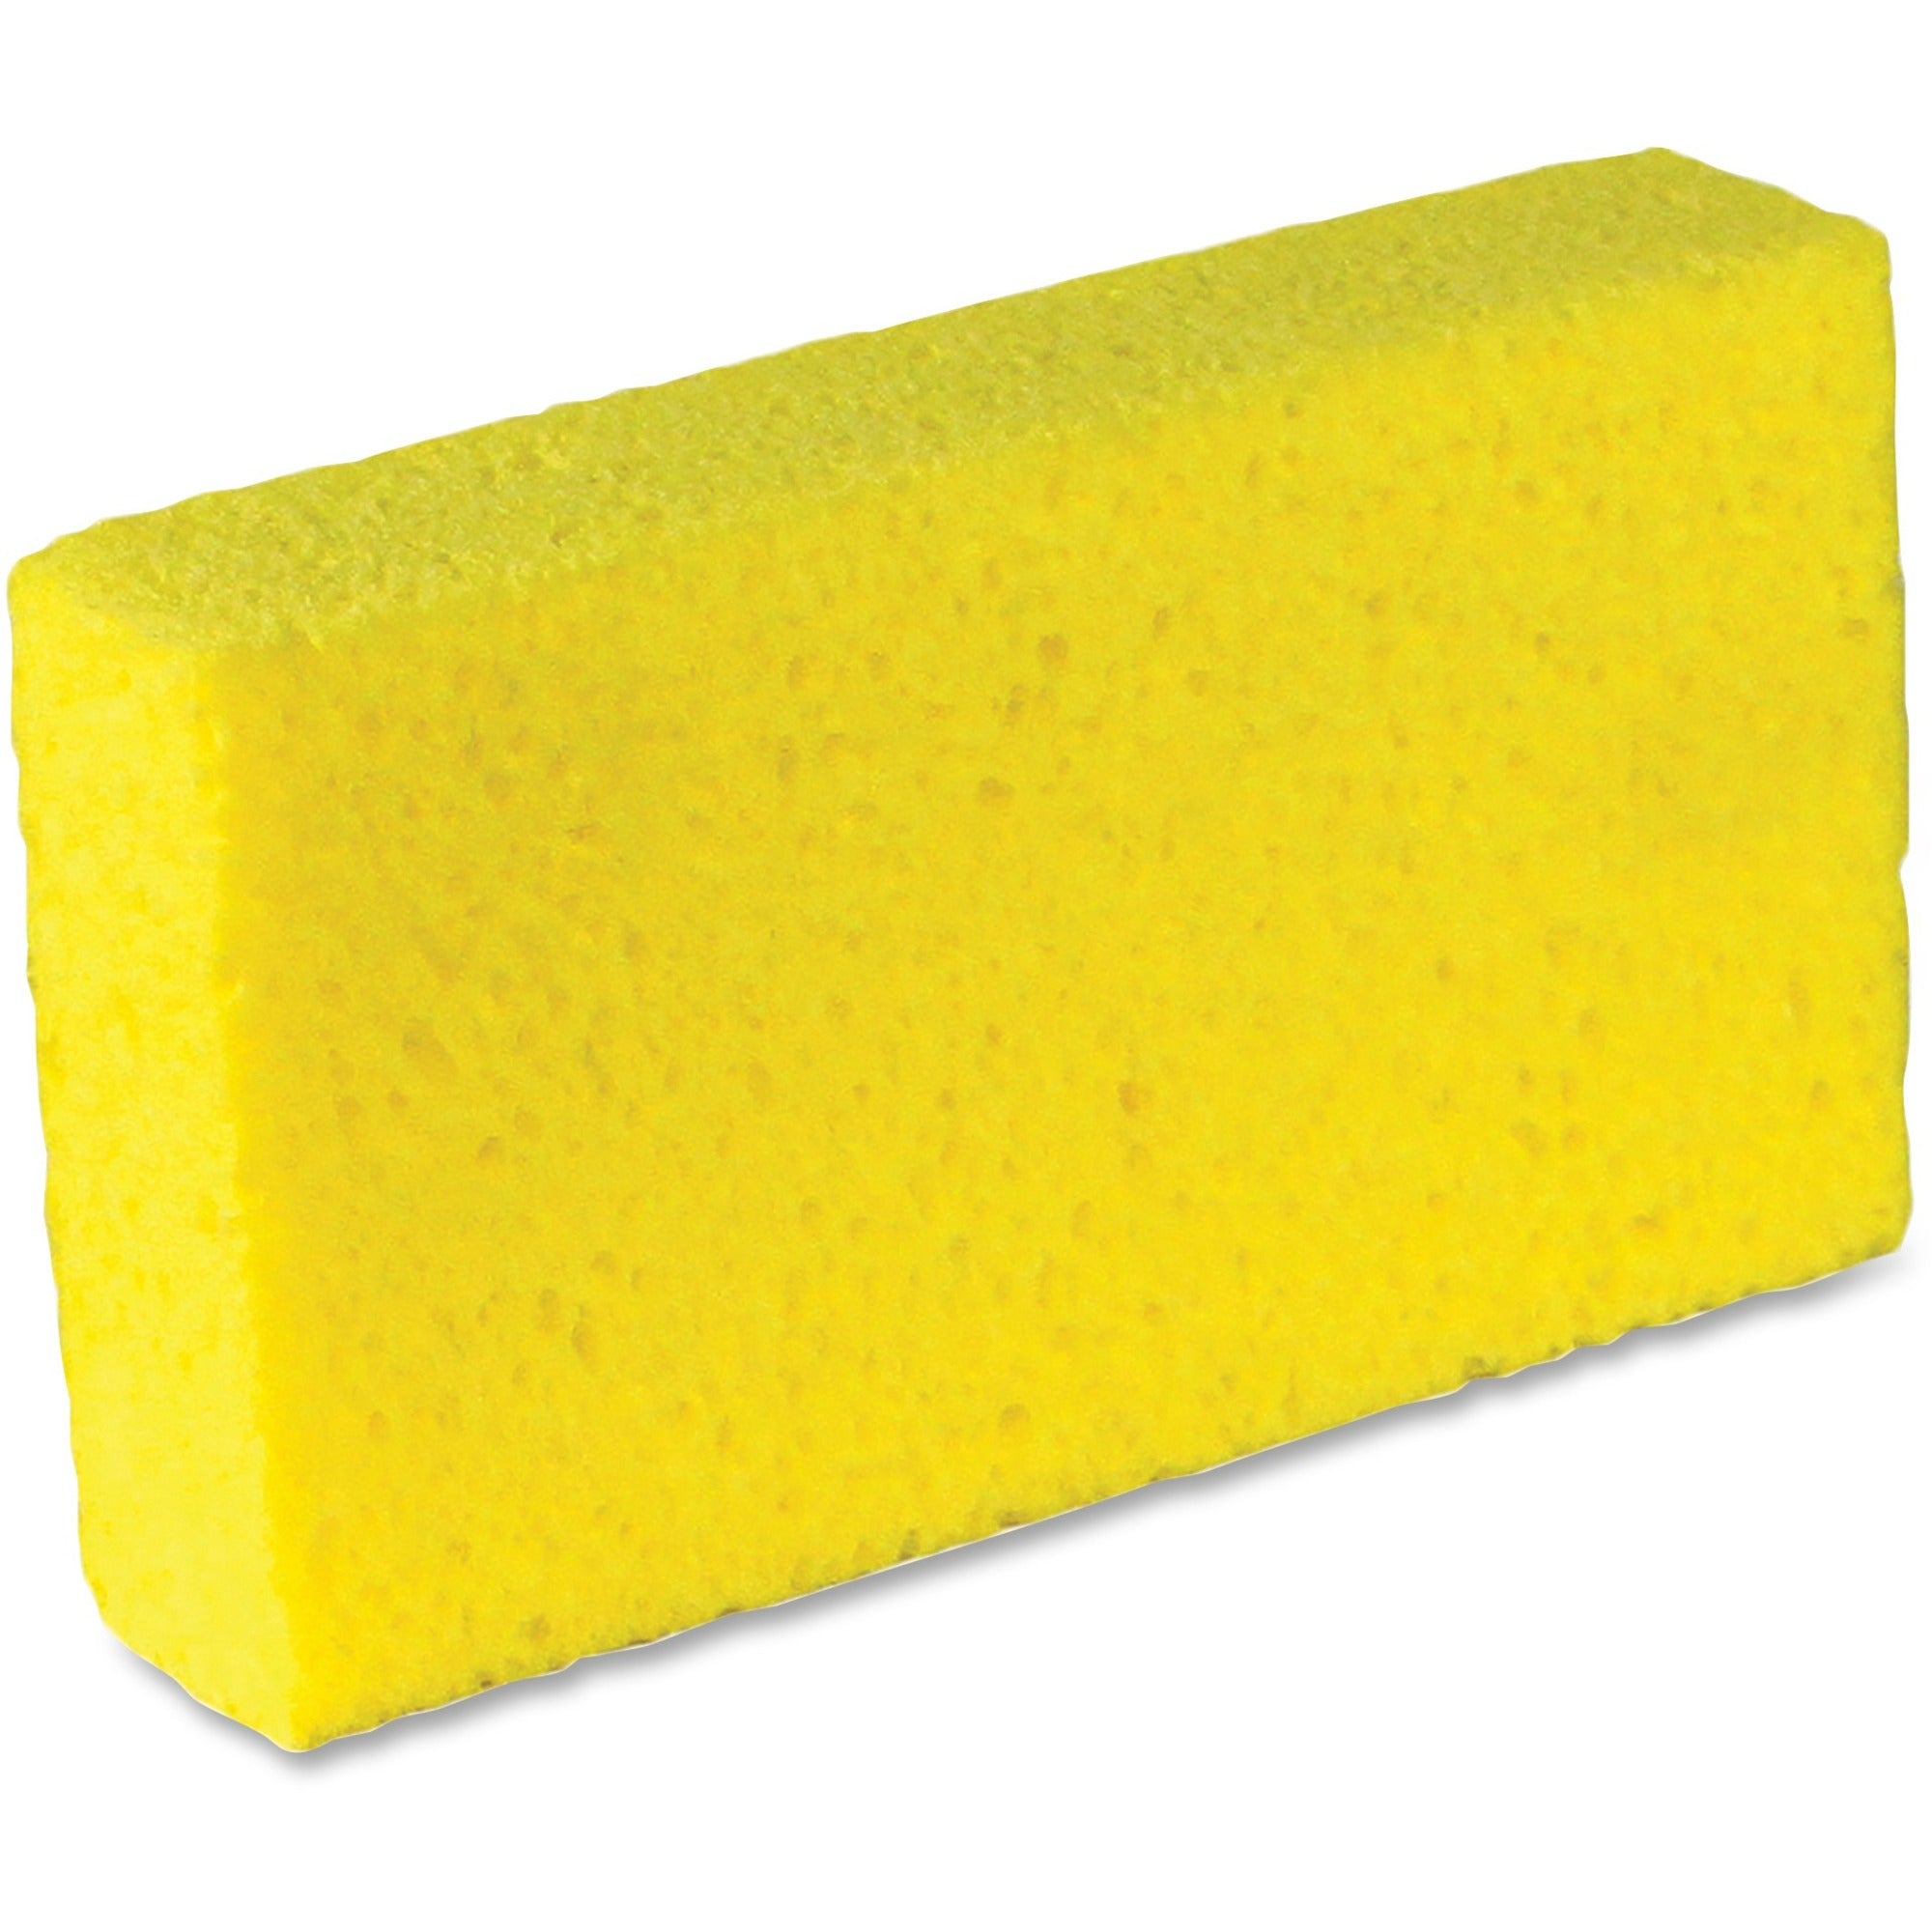 Impact Large Cellulose Sponges - 1.7" Height x 4.2" Width x 7.5" Length - 6/Pack - Cellulose - Yellow - 